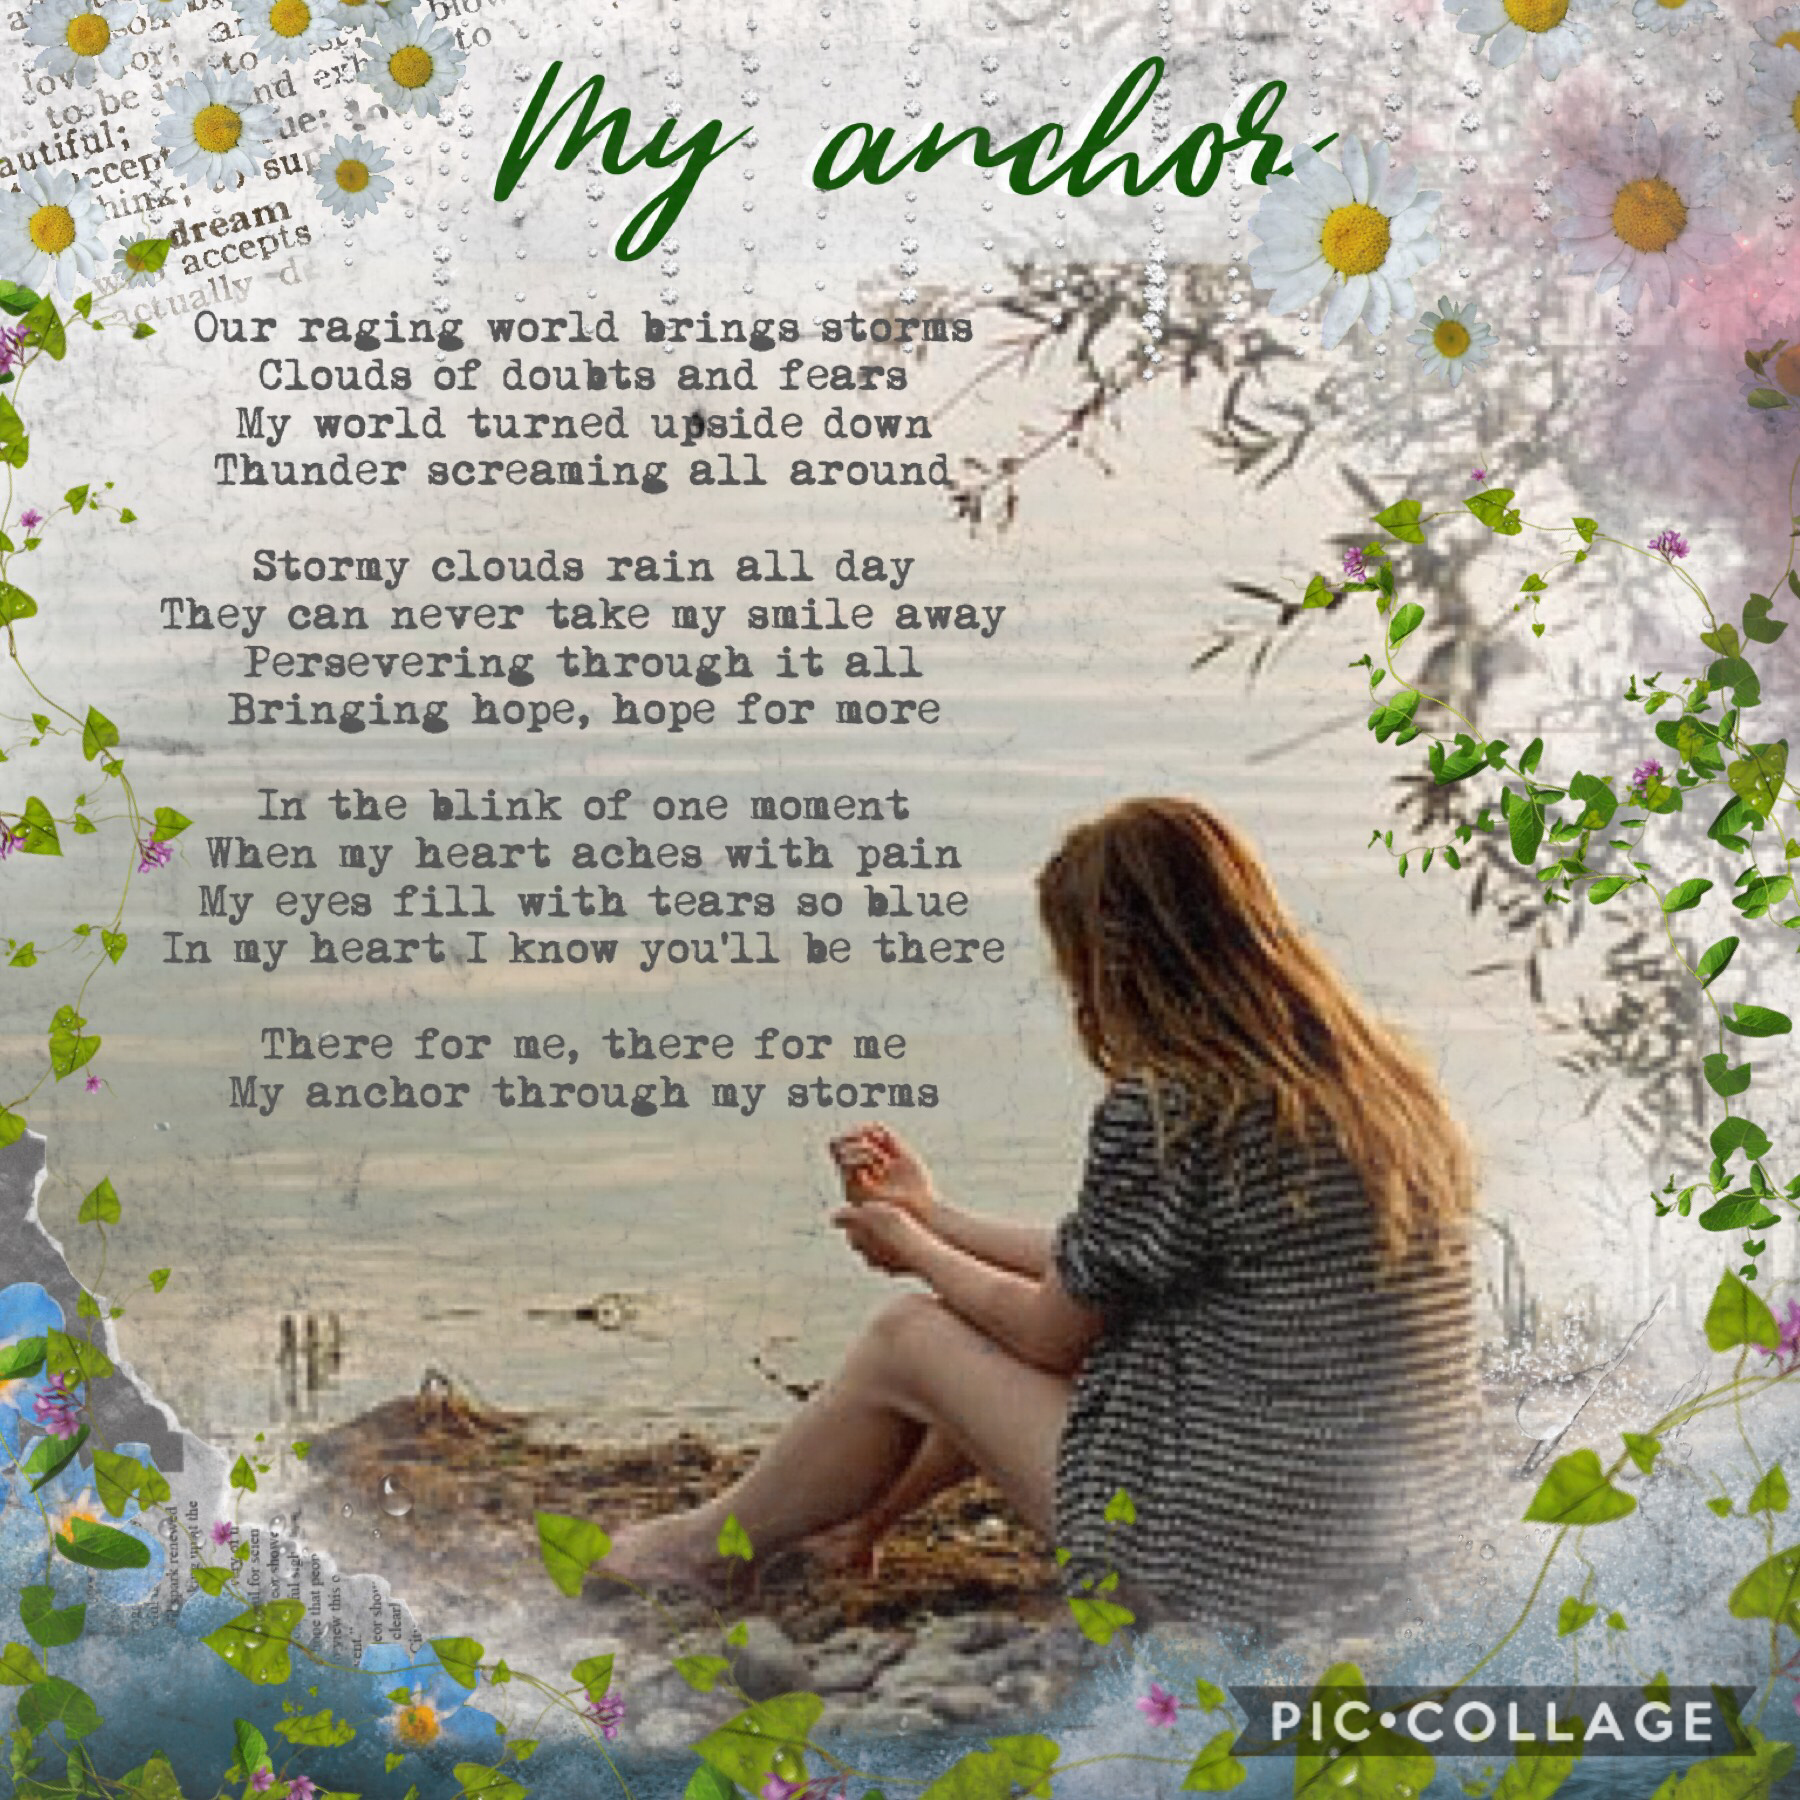 Another poem by me 🙈💗
It’s really bad I know but I wrote it for my music composition. 🙈💗I actually really enjoy composing, I’m doing a song atm 🎶more collages on the way just thought I’d share ❤️